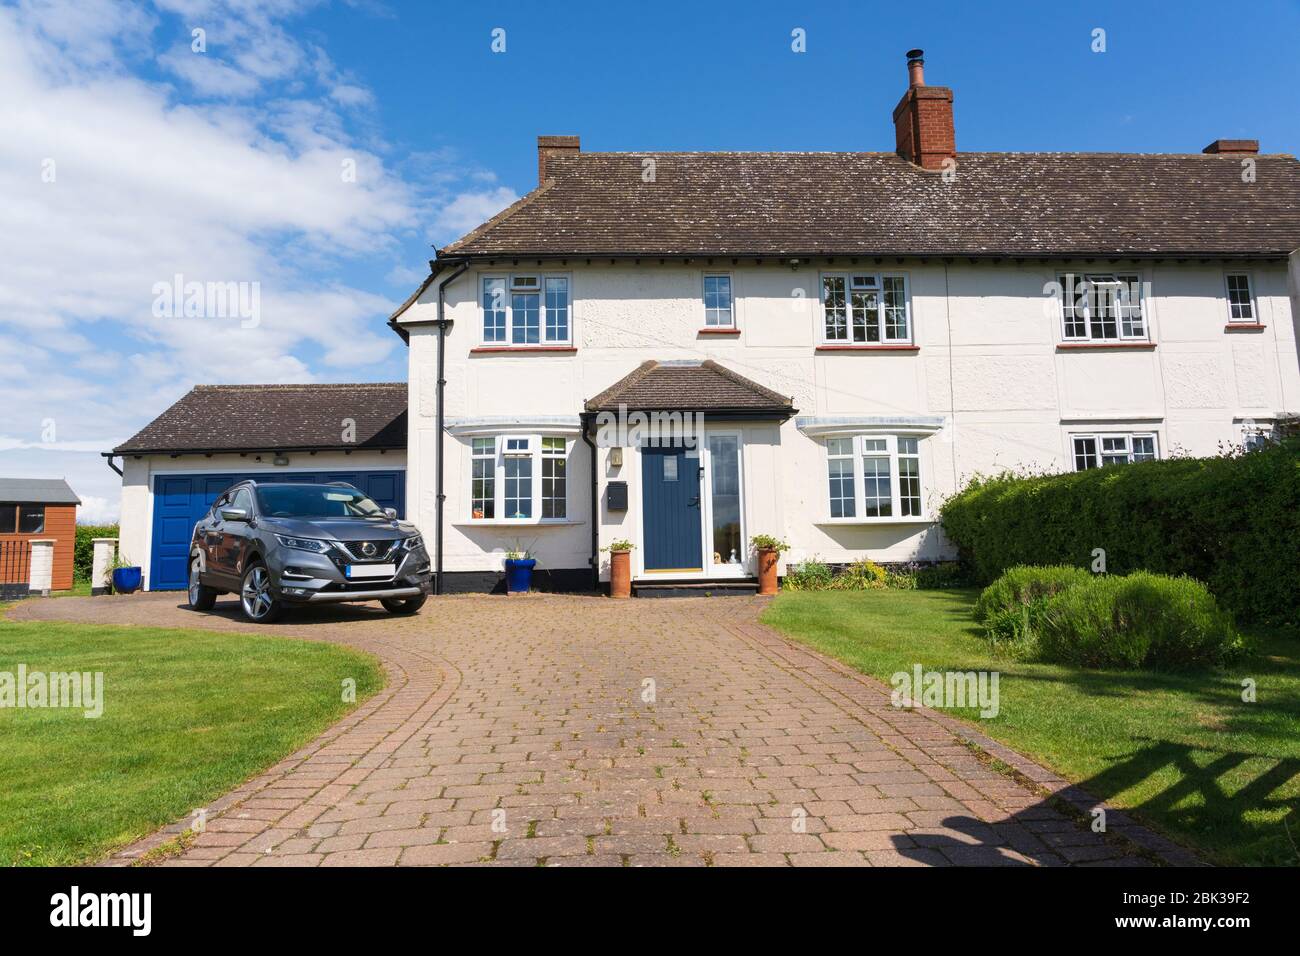 Exterior of a former 1920's semi-detached council house with added porch, double garage and driveway. Version without car in driveway also available. Stock Photo